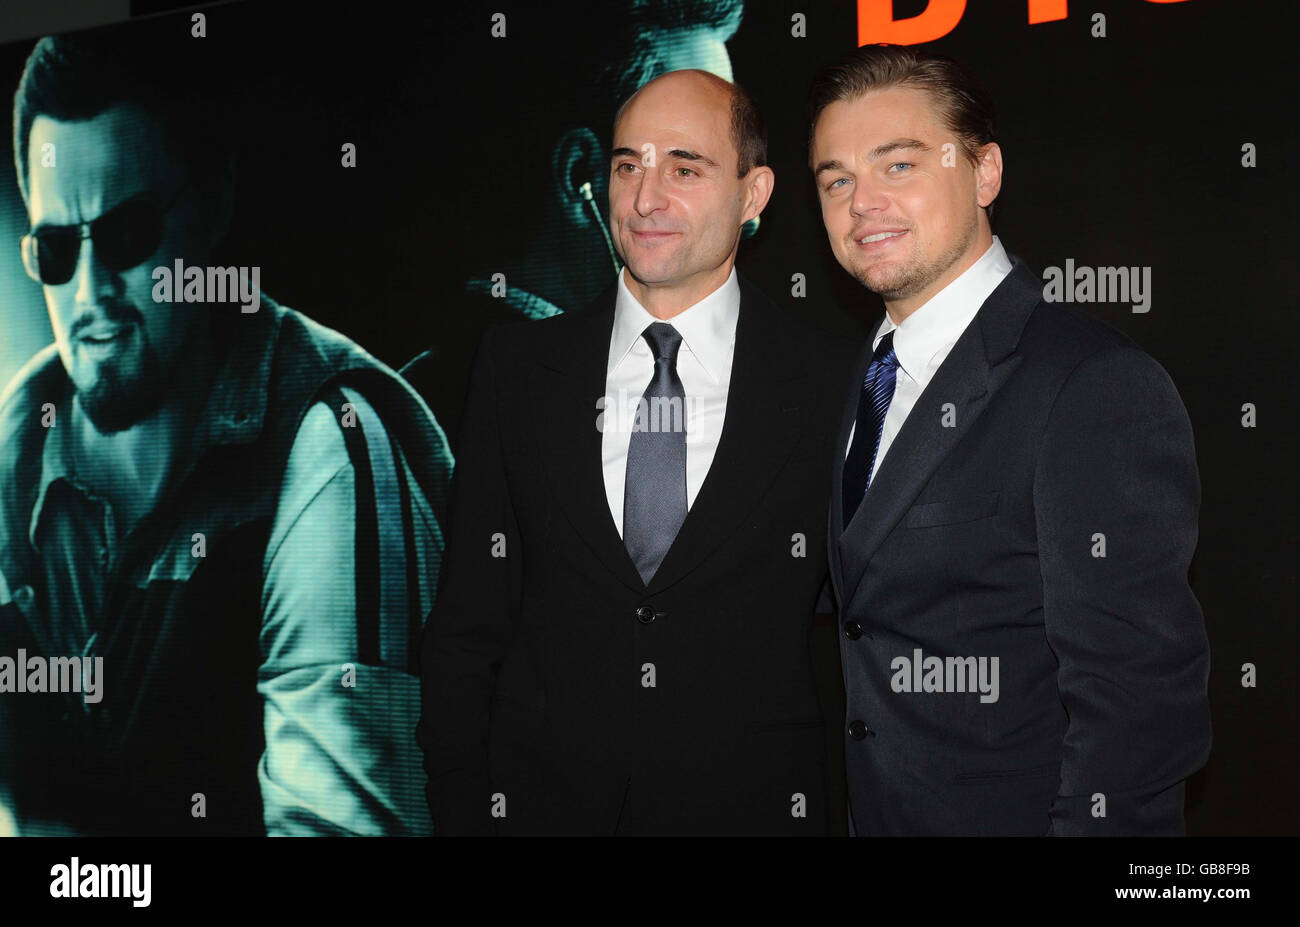 Leonardo DiCaprio, (right), with British actor, Mark Strong (left) at the UK film premiere of 'Body of Lies' at the Vue West End, in central London. Stock Photo